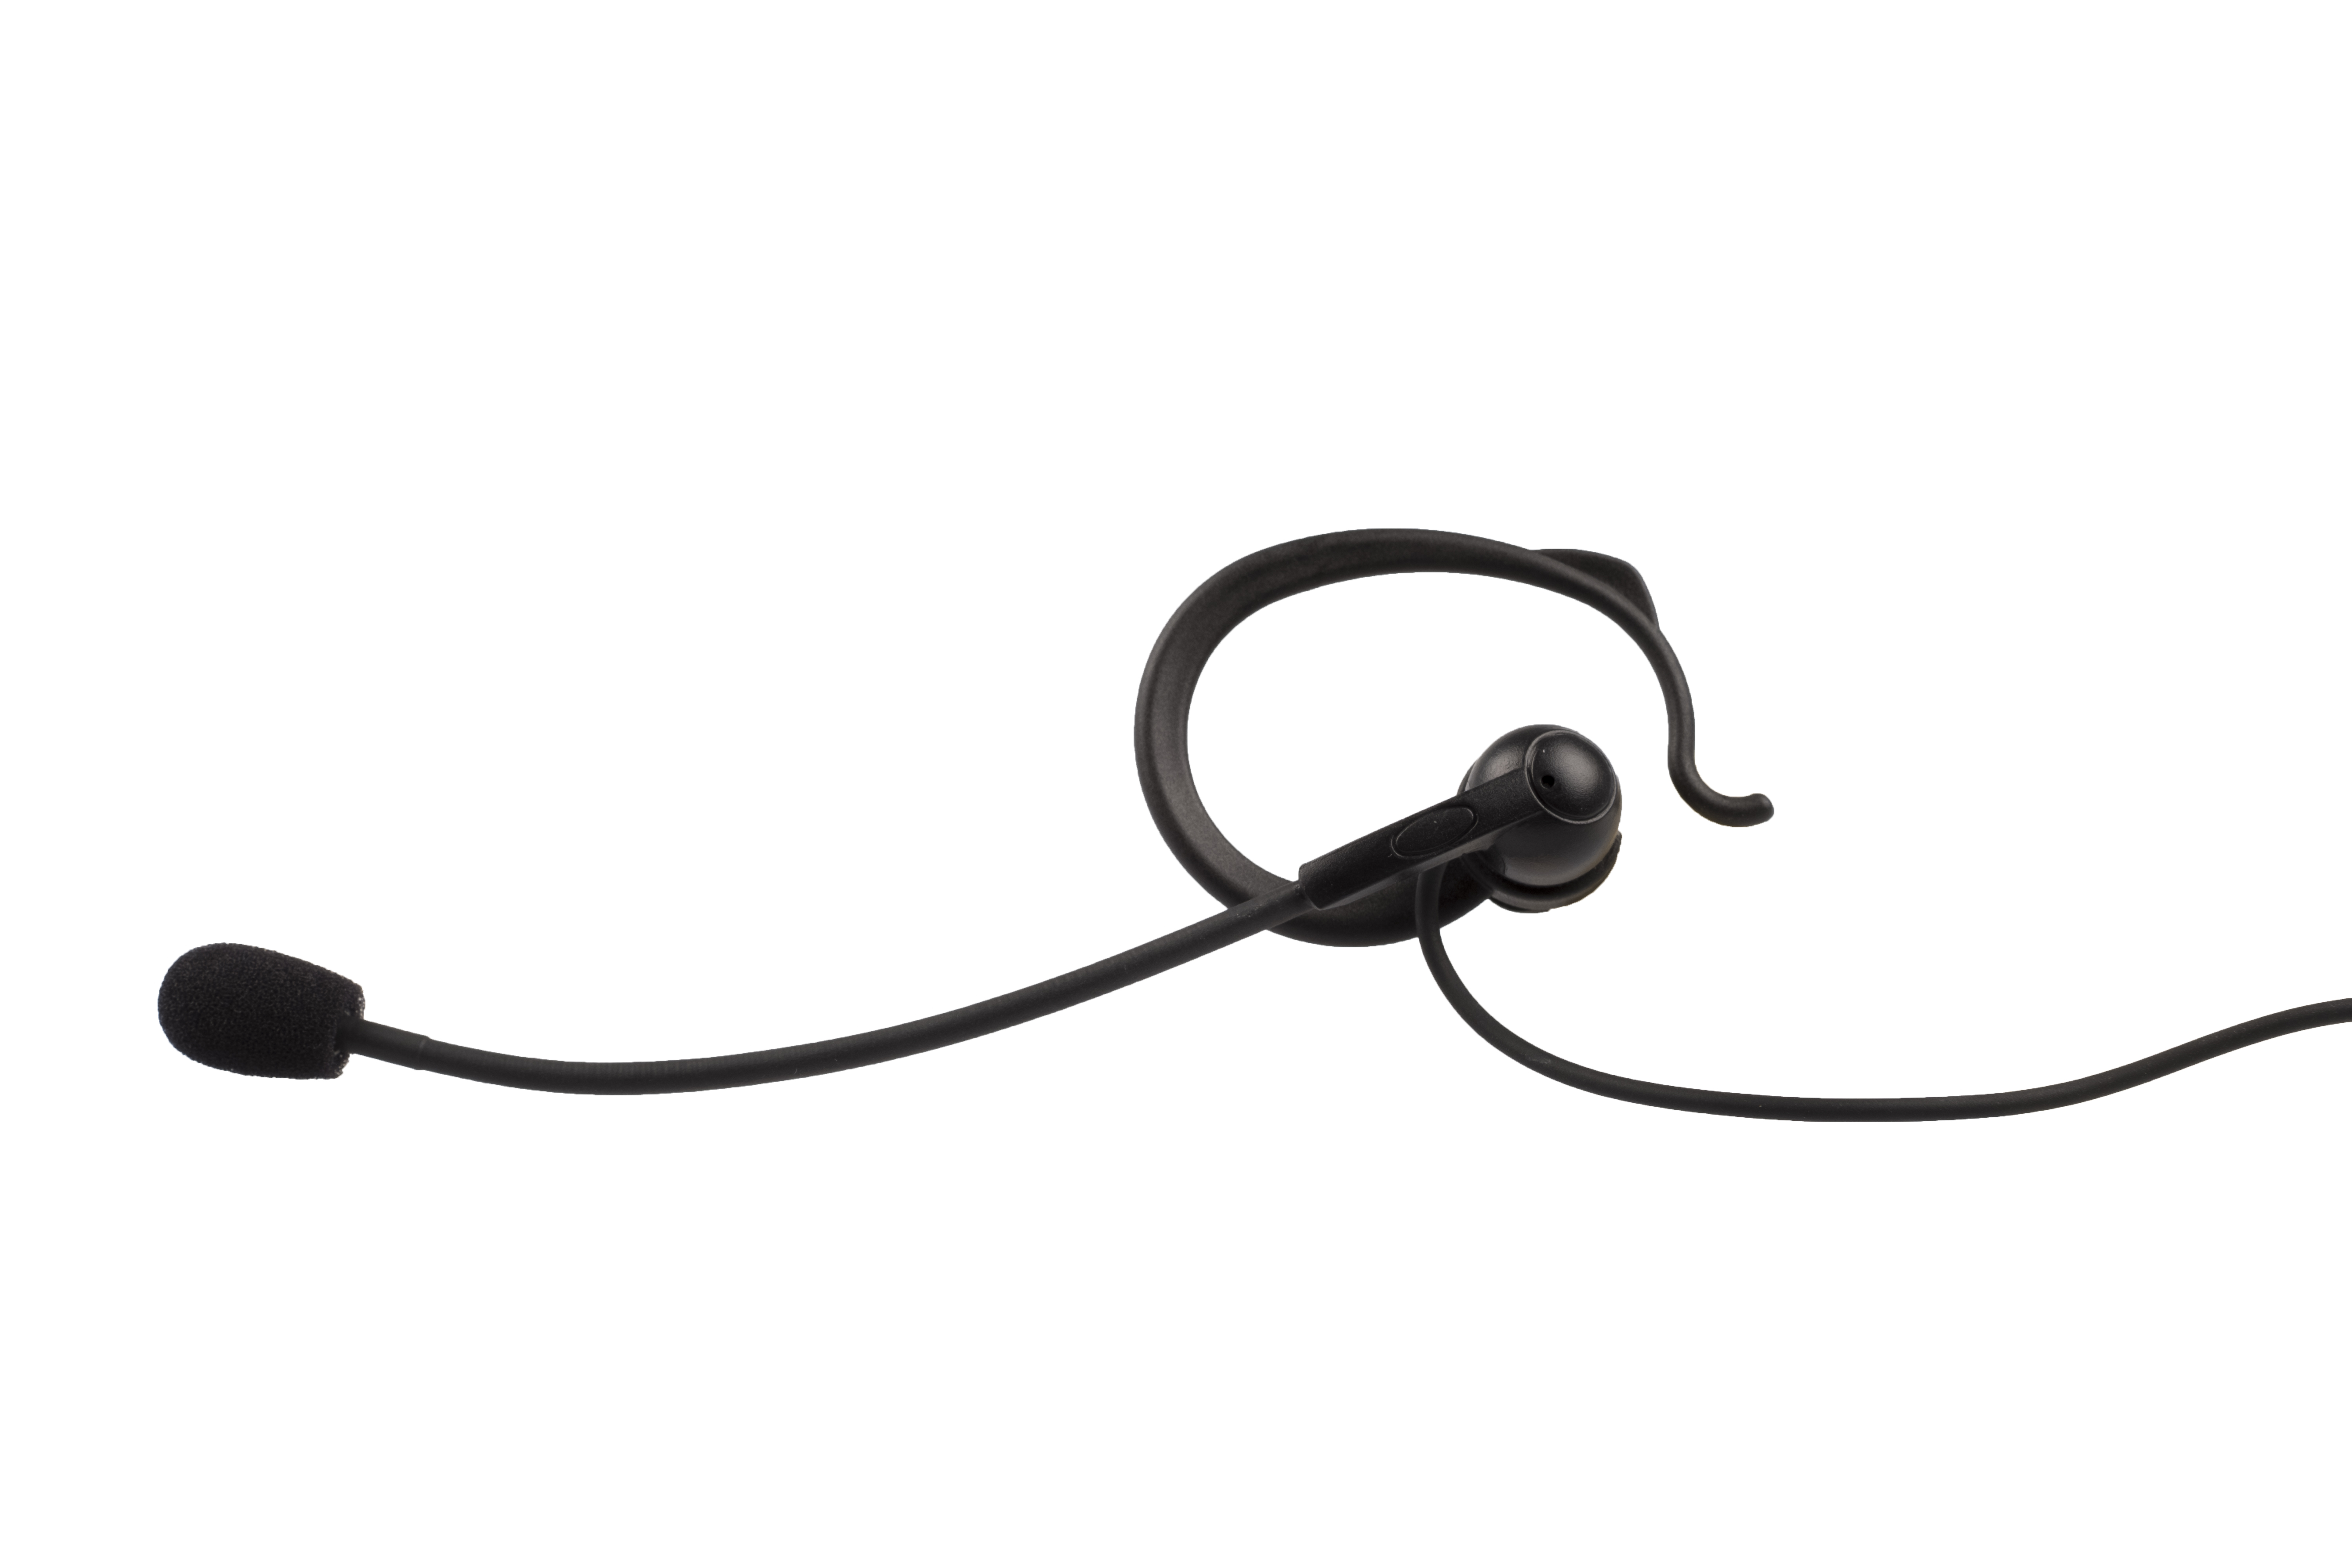 /axiwi-HE-075-sport-headset-noise-cancelling